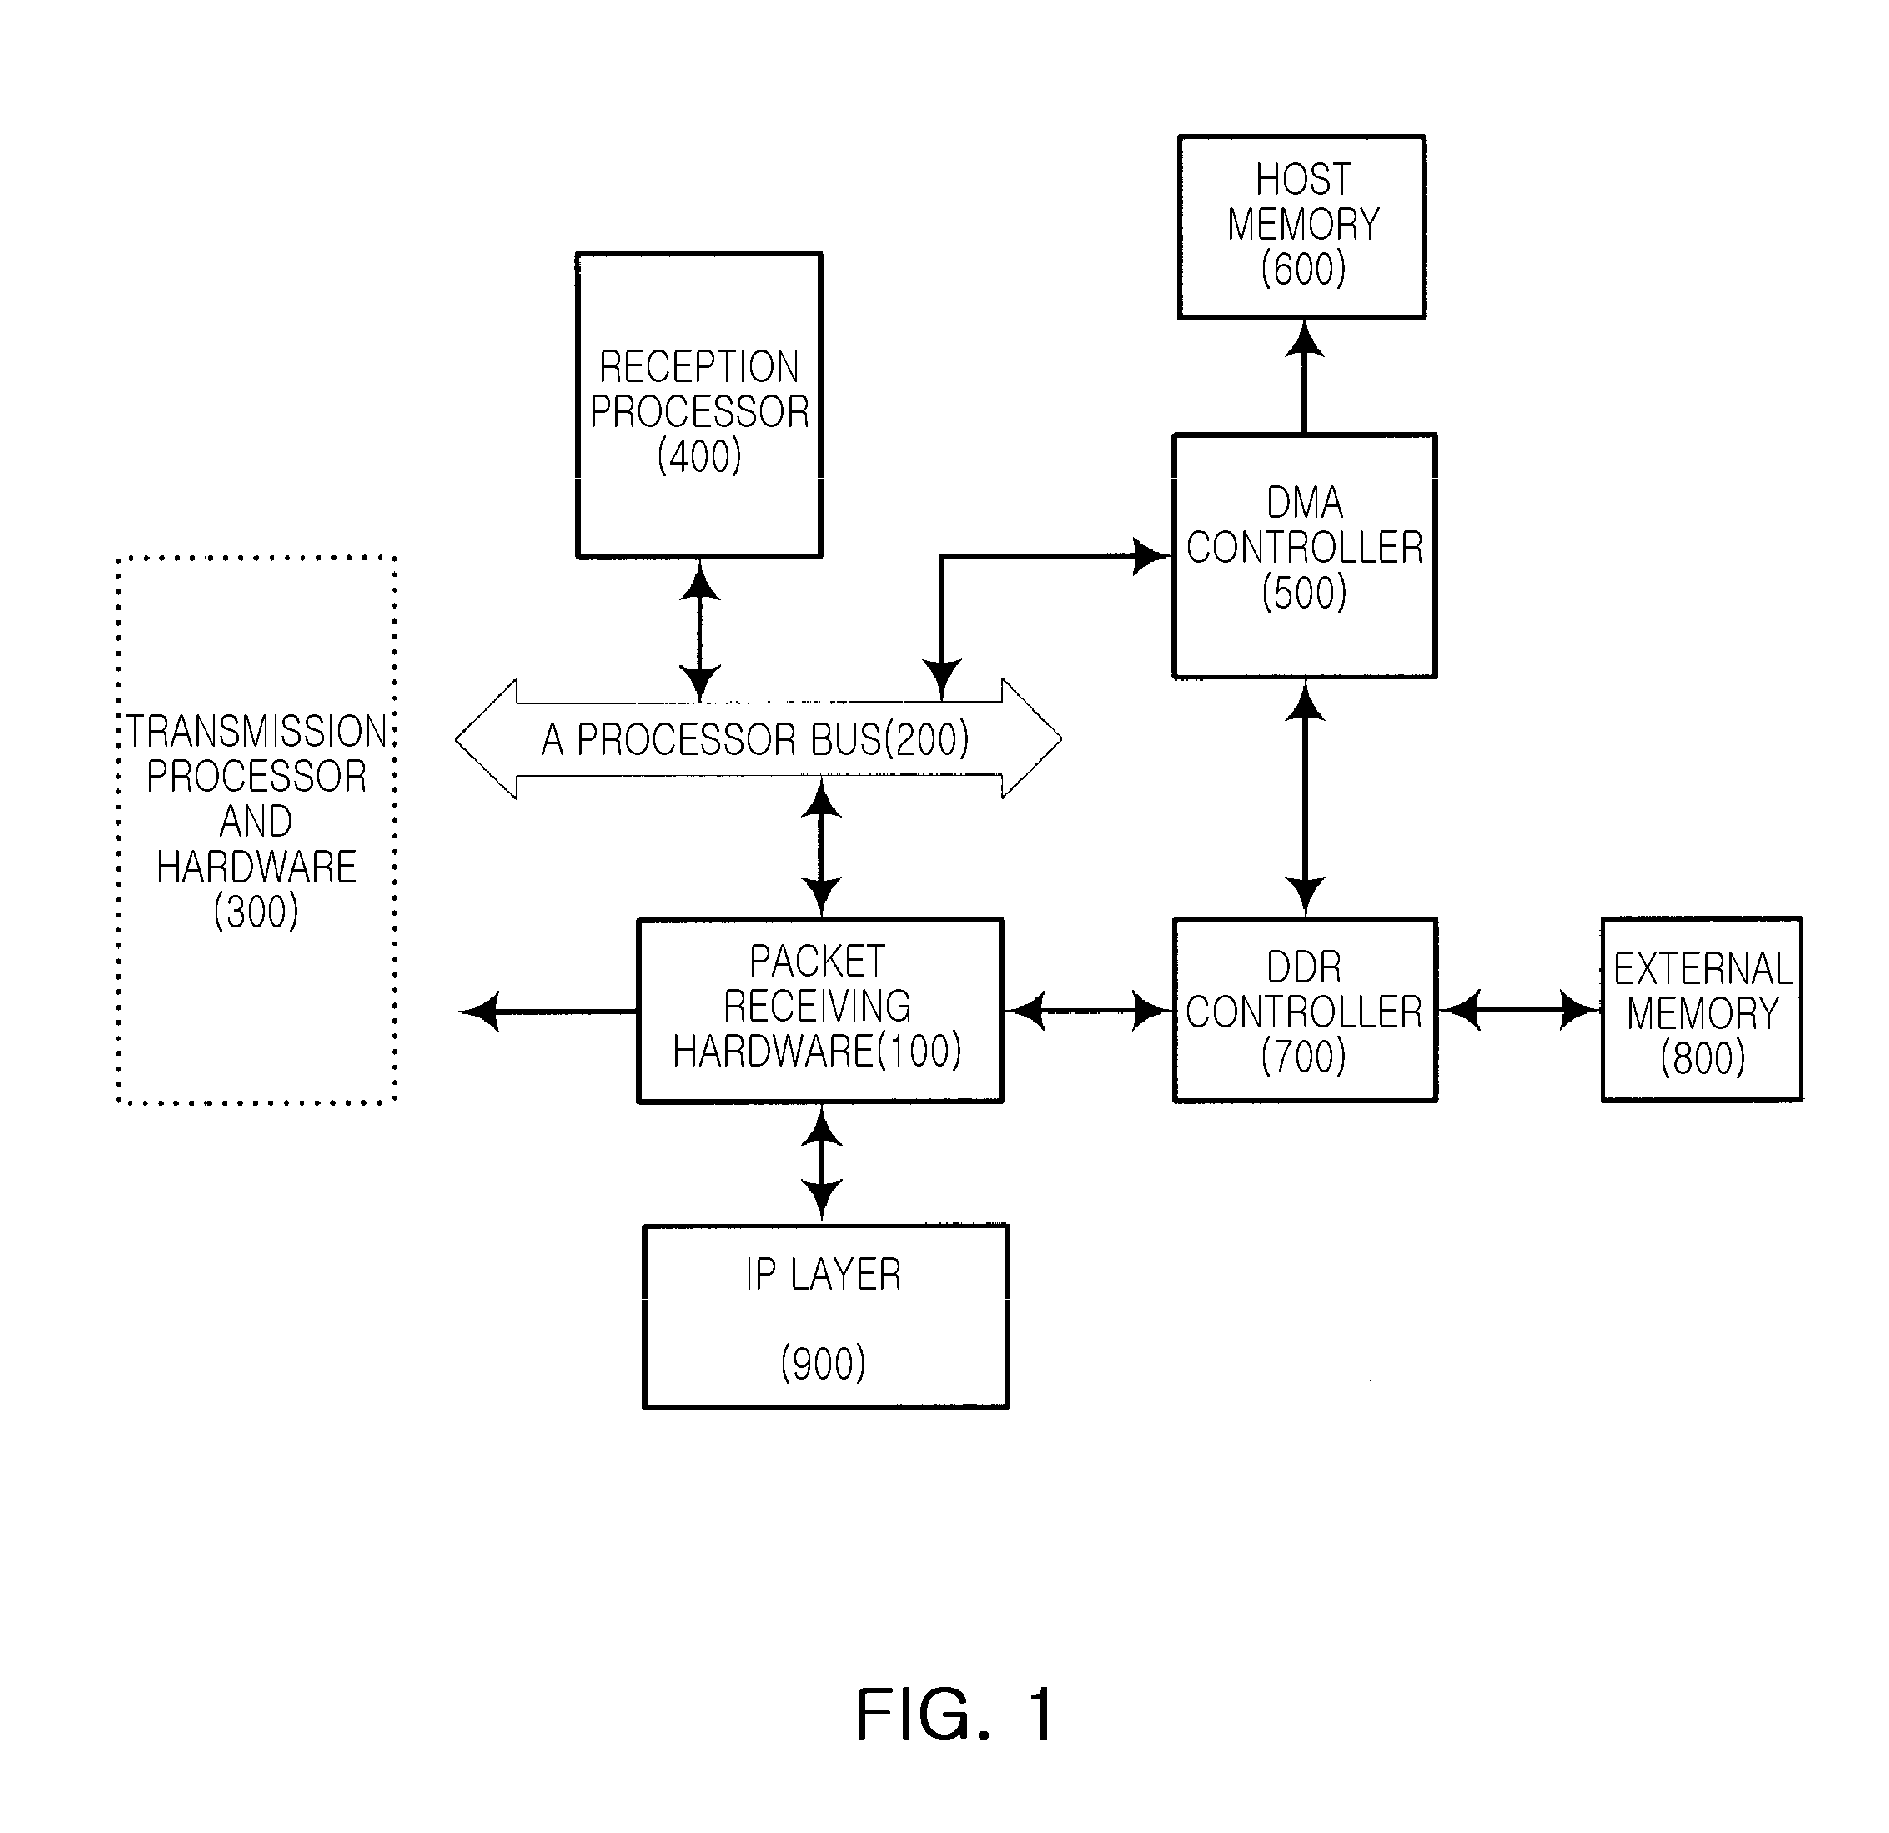 Packet receiving hardware apparatus for TCP offload engine and receiving system and method using the same